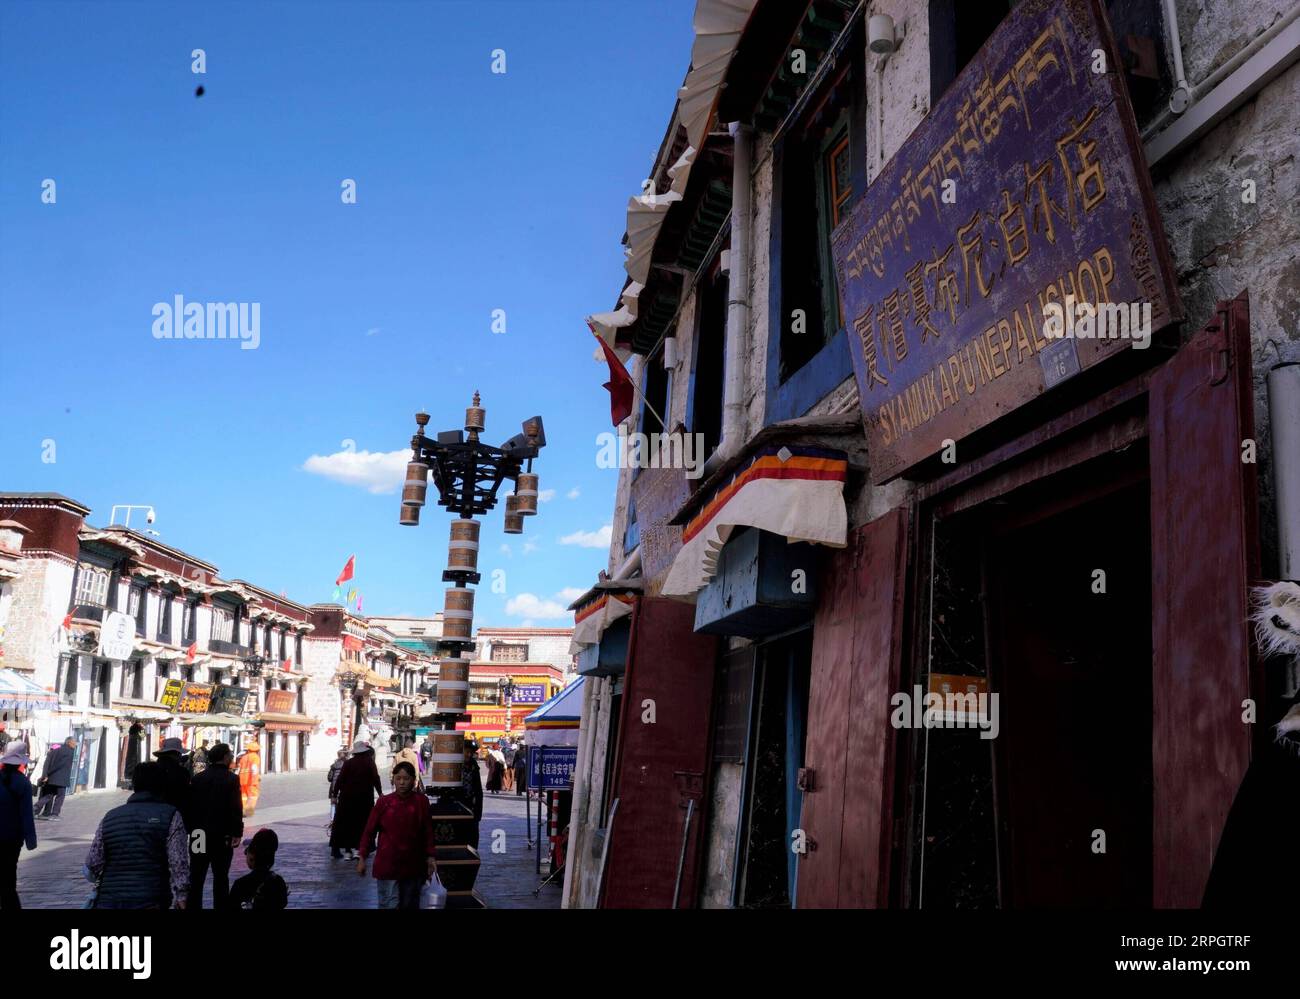 191022 -- LHASA, Oct. 22, 2019 -- Photo taken on Oct. 14, 2019 shows the Syamukapu Nepali Shop in Lhasa, southwest China s Tibet Autonomous Region. Covering an area of no more than 100 square meters, a century-old store catches the eyes of pedestrians in Barkhor Street in central Lhasa, with its traditional Tibetan furnishing on the front and a sign inscribed with the name in Tibetan, Chinese and English -- Syamukapu Nepali Shop. TO GO WITH Across China: Century-old Nepali store in Tibet sign of China-Nepal friendship  InTibetCHINA-TIBET-NEPALI STORE CN PurbuxZhaxi PUBLICATIONxNOTxINxCHN Stock Photo